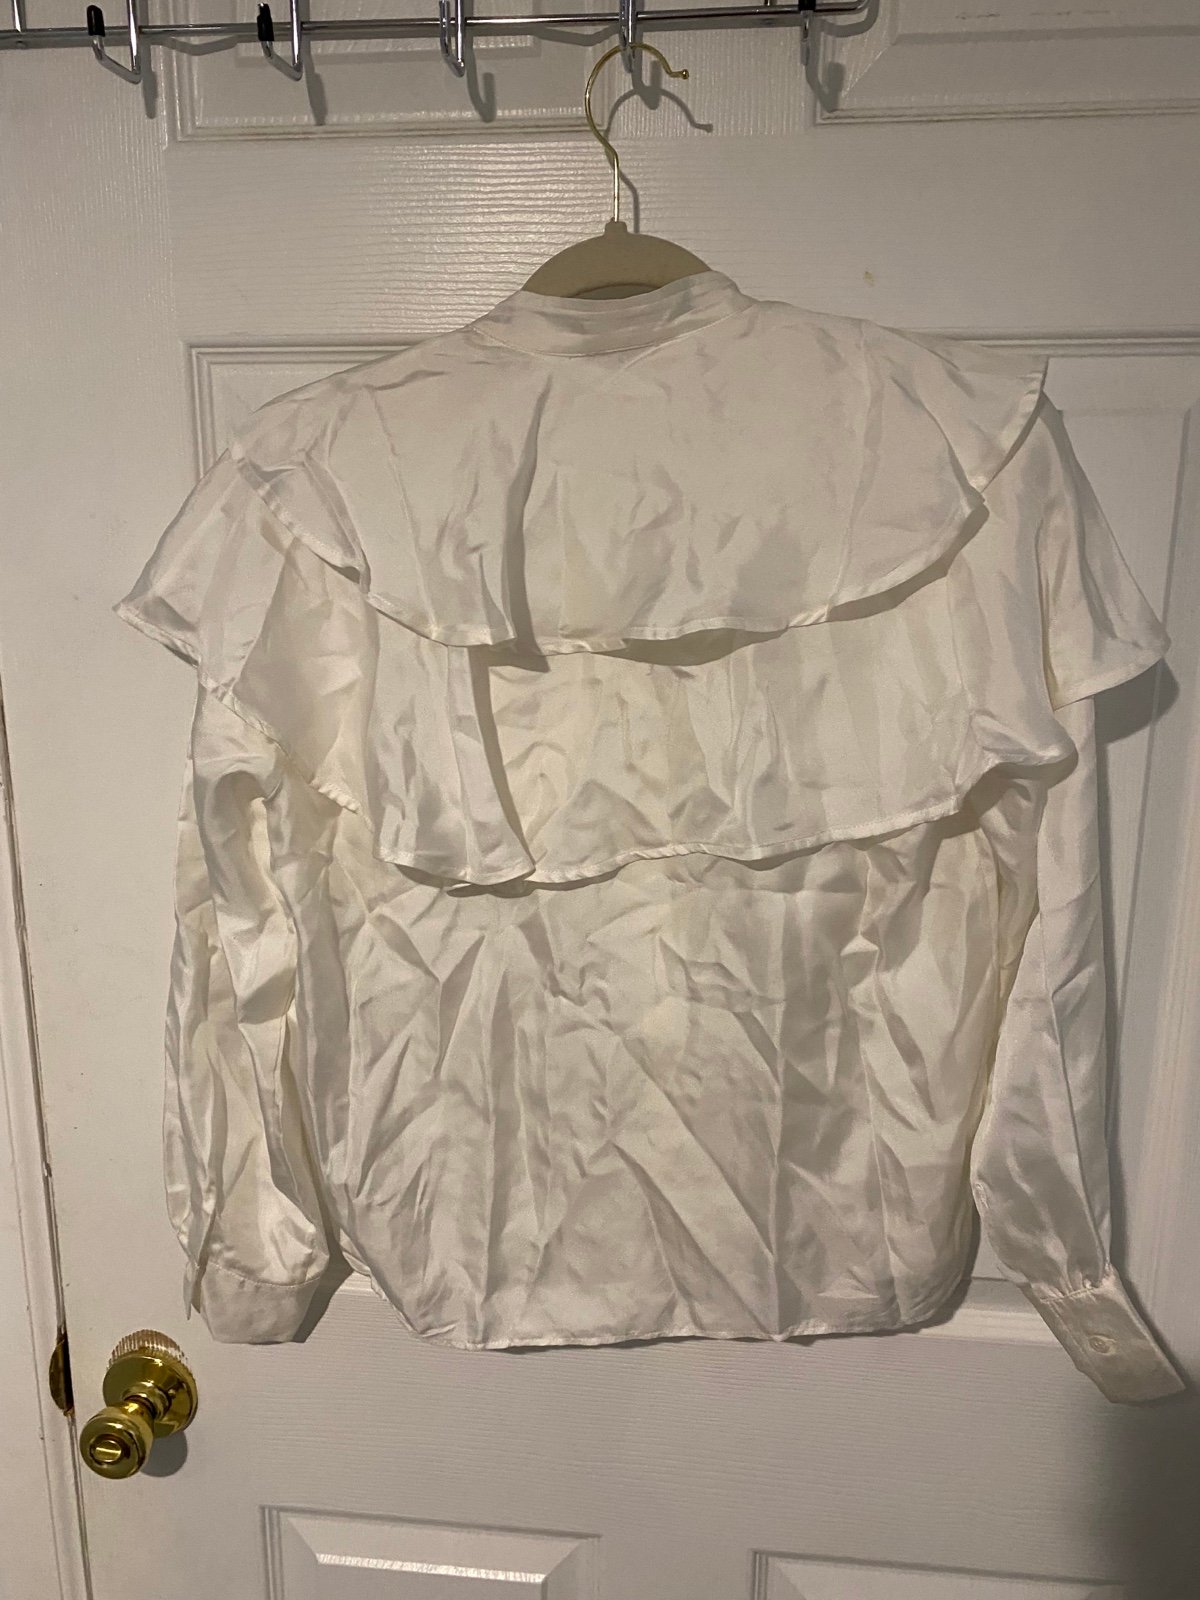 Elegant Sandro ruffle silk blouse nwt nIFf5g9y5 Outlet Store